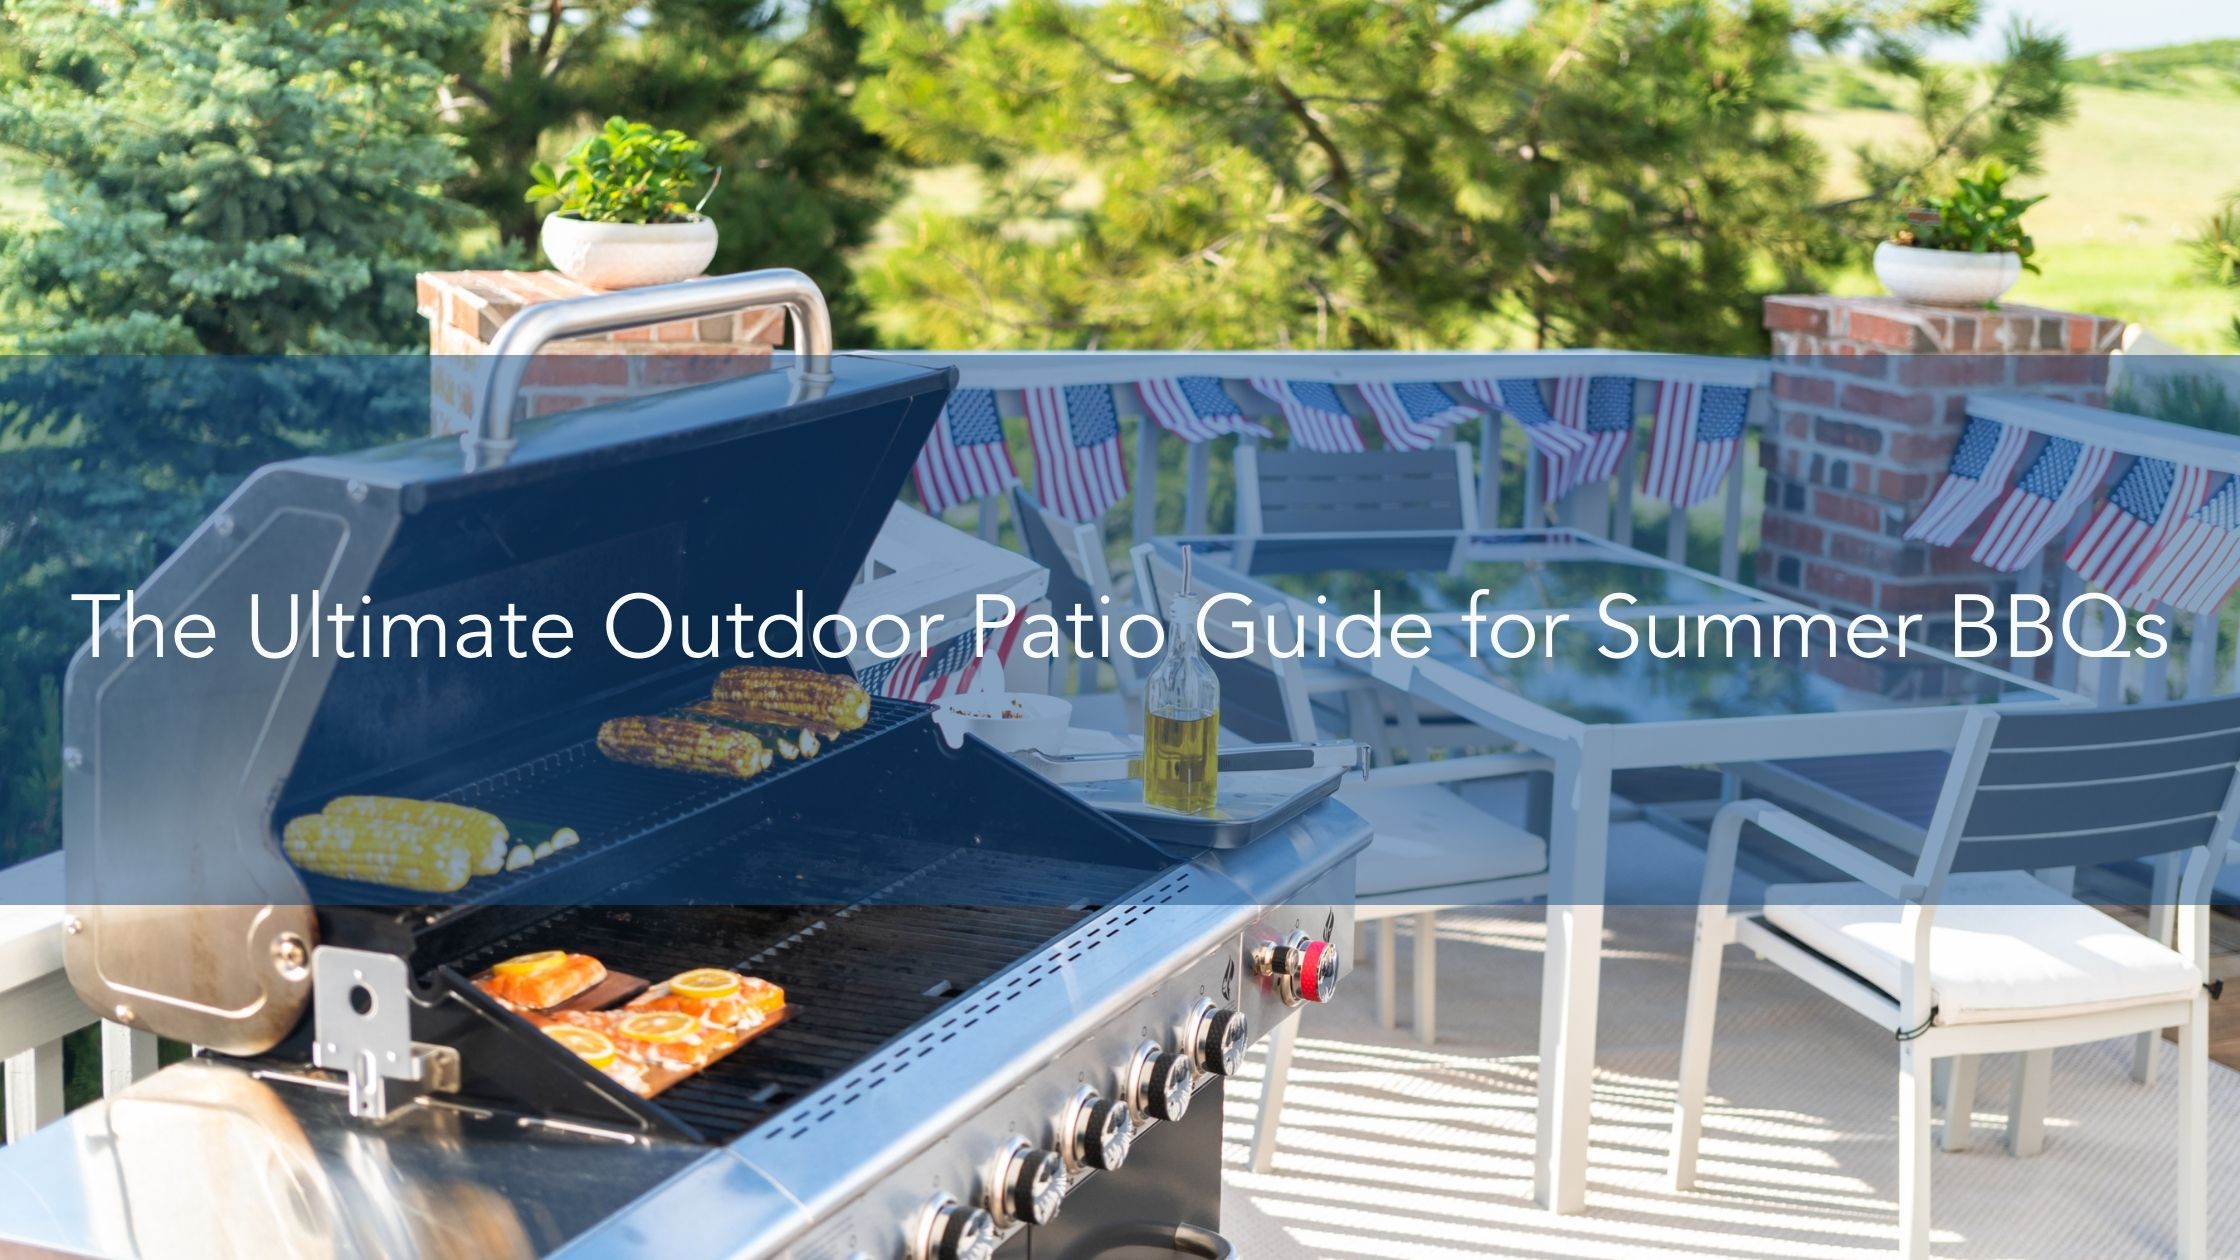 https://handymanconnection.com/wp-content/uploads/2022/07/The-Ultimate-Outdoor-Patio-Guide-for-Summer-BBQs.jpg